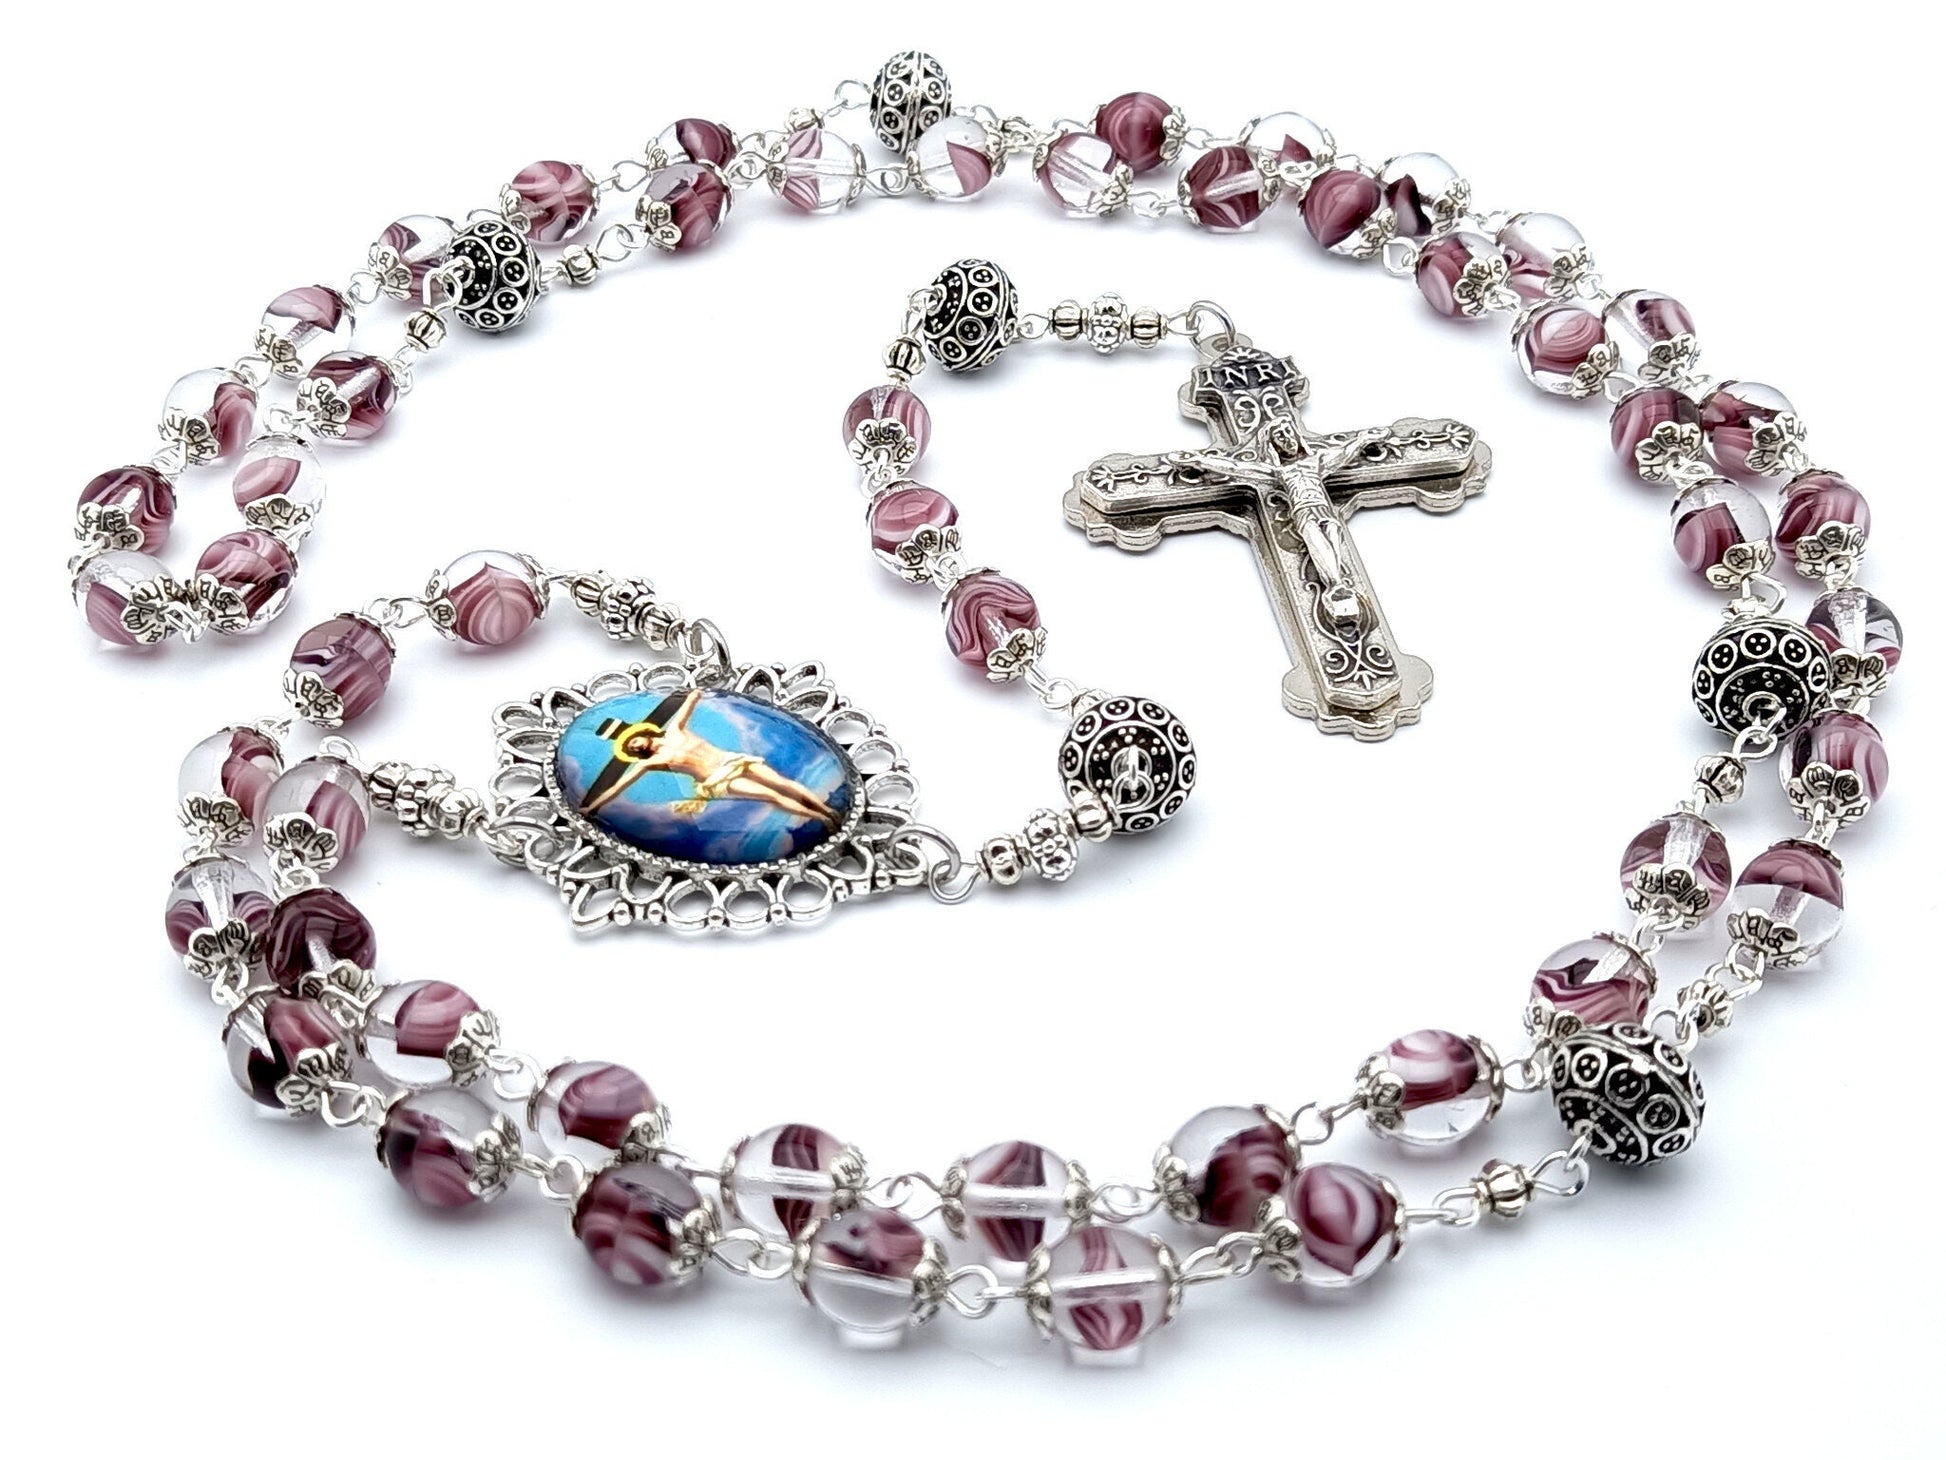 The Crucifixion unique rosary beads with marbled pink glass and silver beads, silver crucifix and picture centre medal.